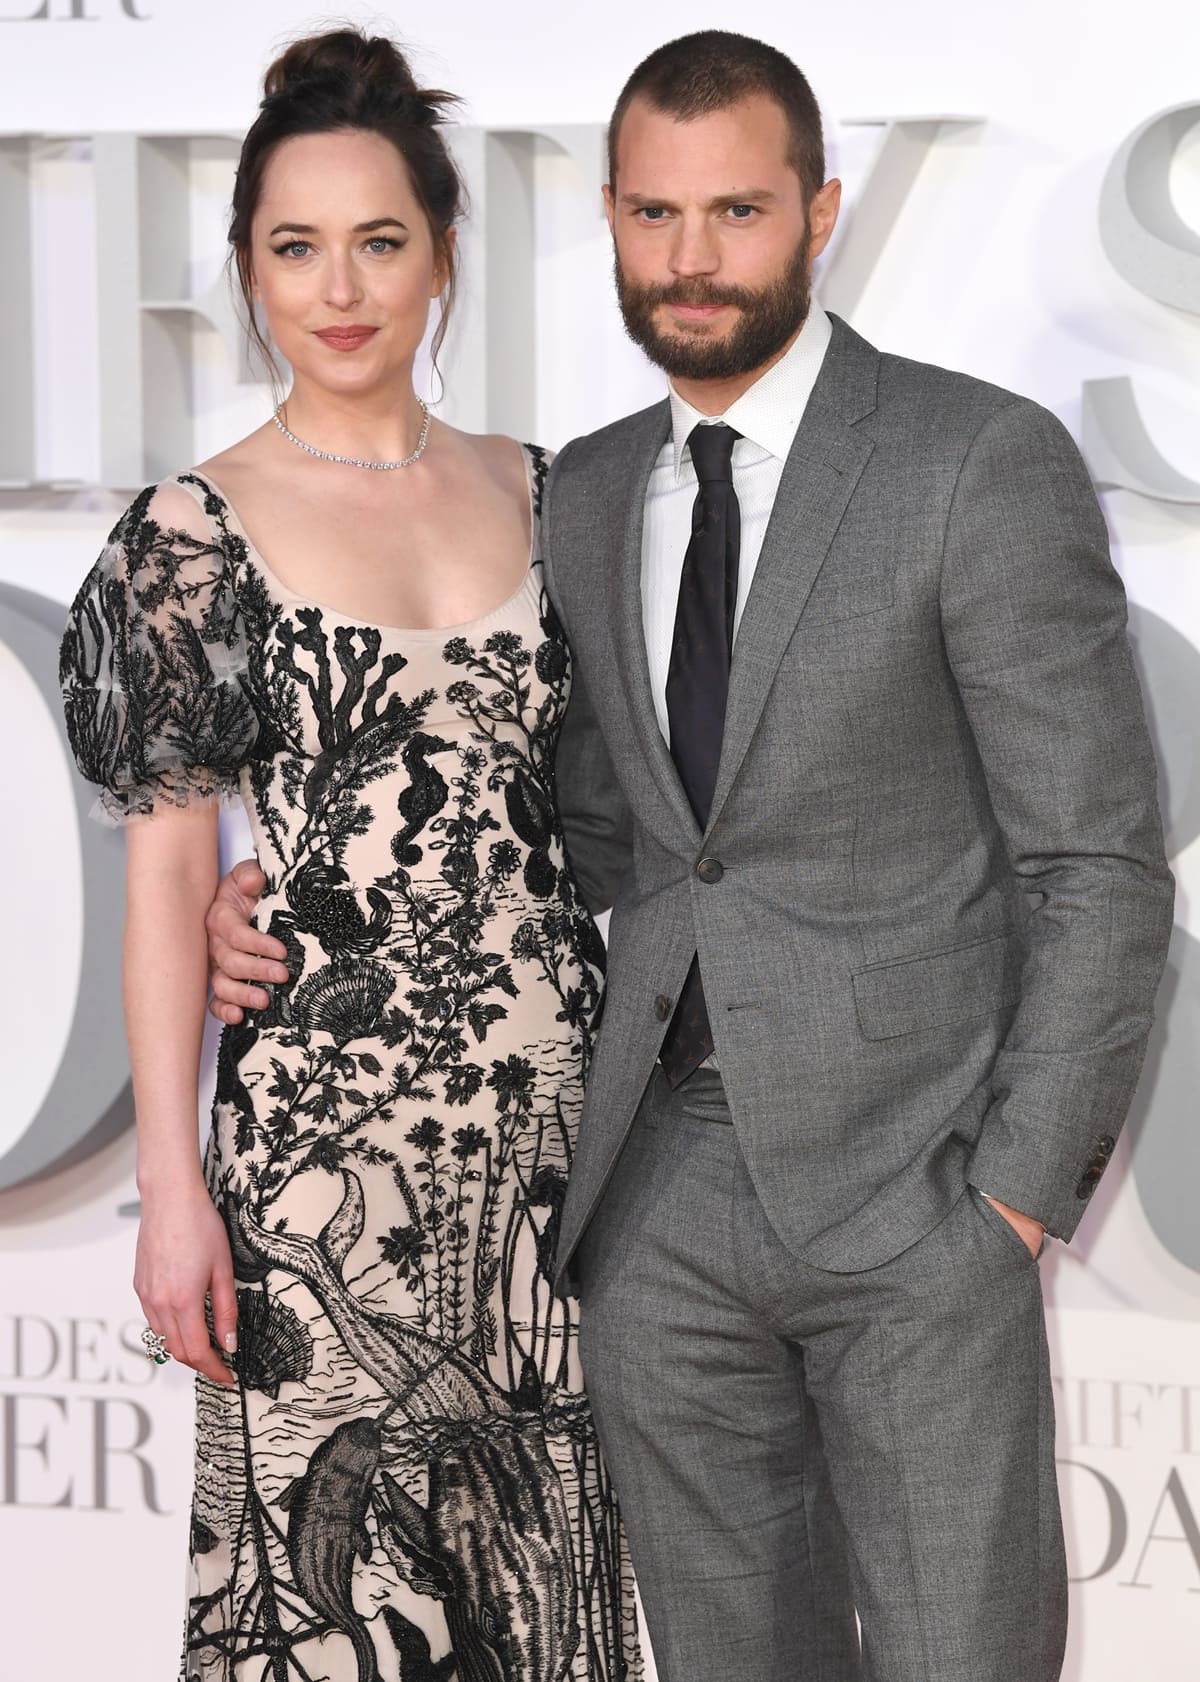 Jamie Dornan and Dakota Johnson were reportedly paid $250,000 each for filming Fifty Shades of Grey